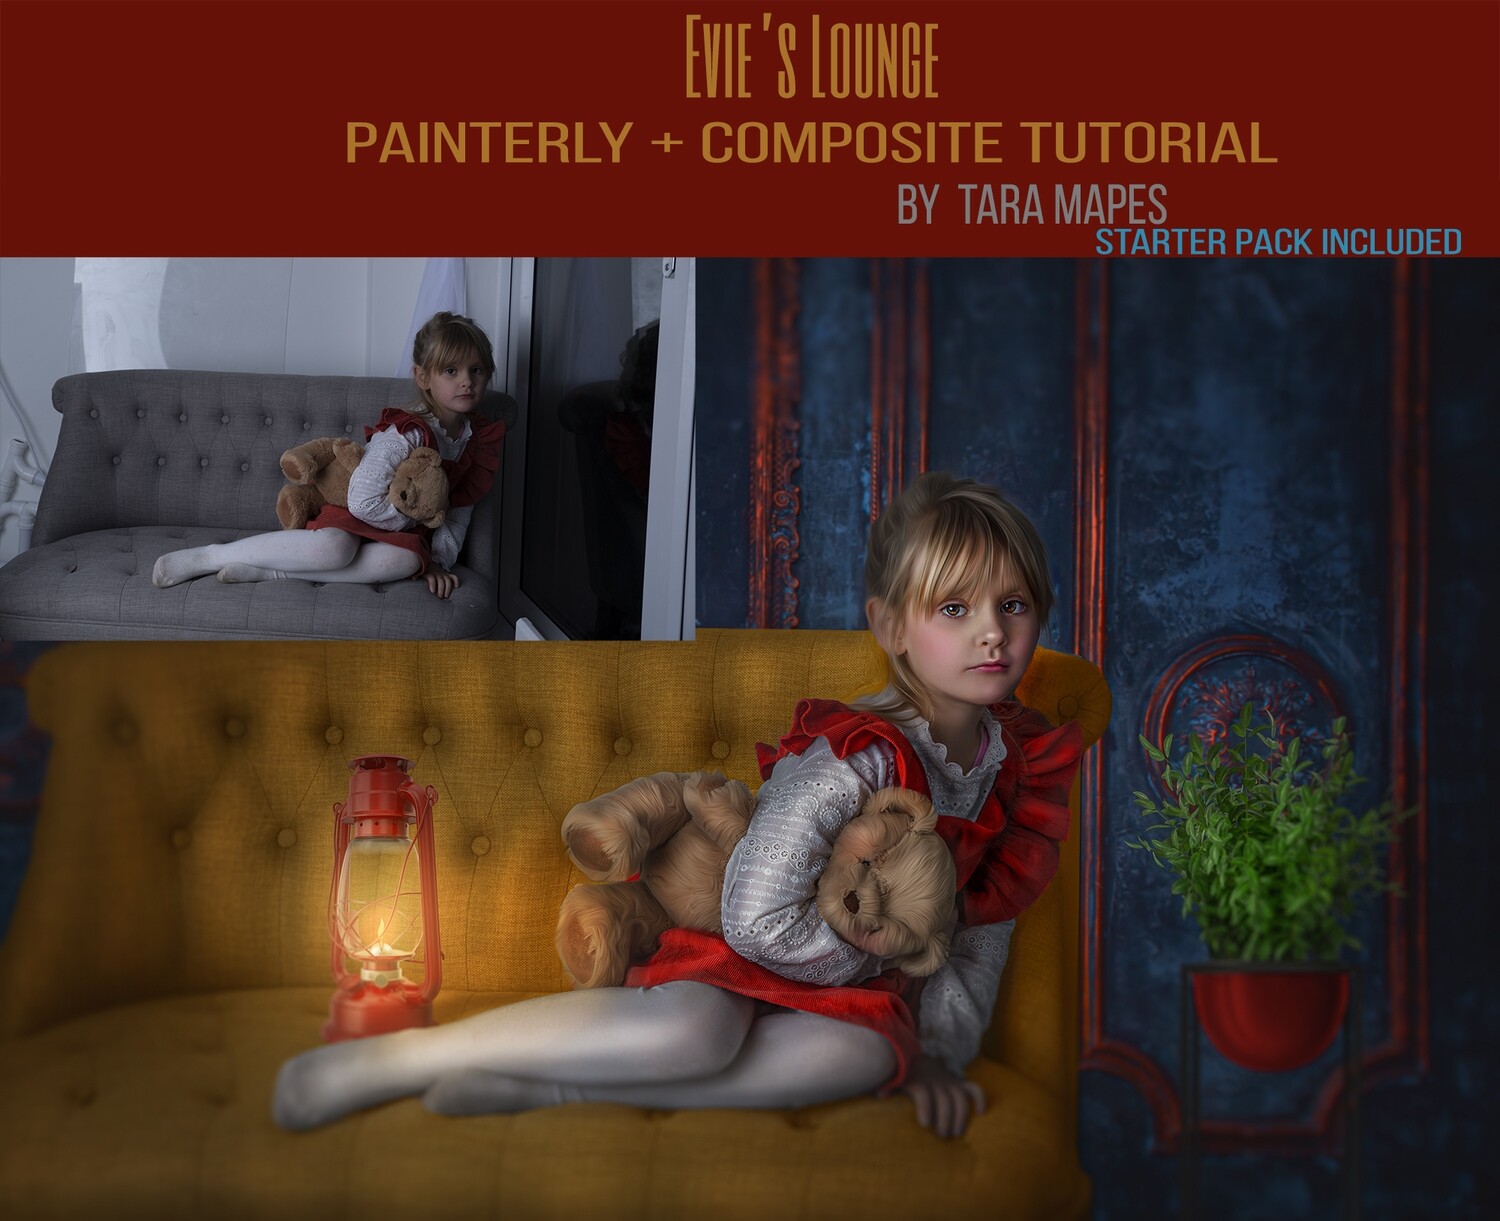 Evie's Lounge Painterly Editing + Compositing Photoshop Tutorial with STARTER PACK- Fine Art Tutorial by Tara Mapes